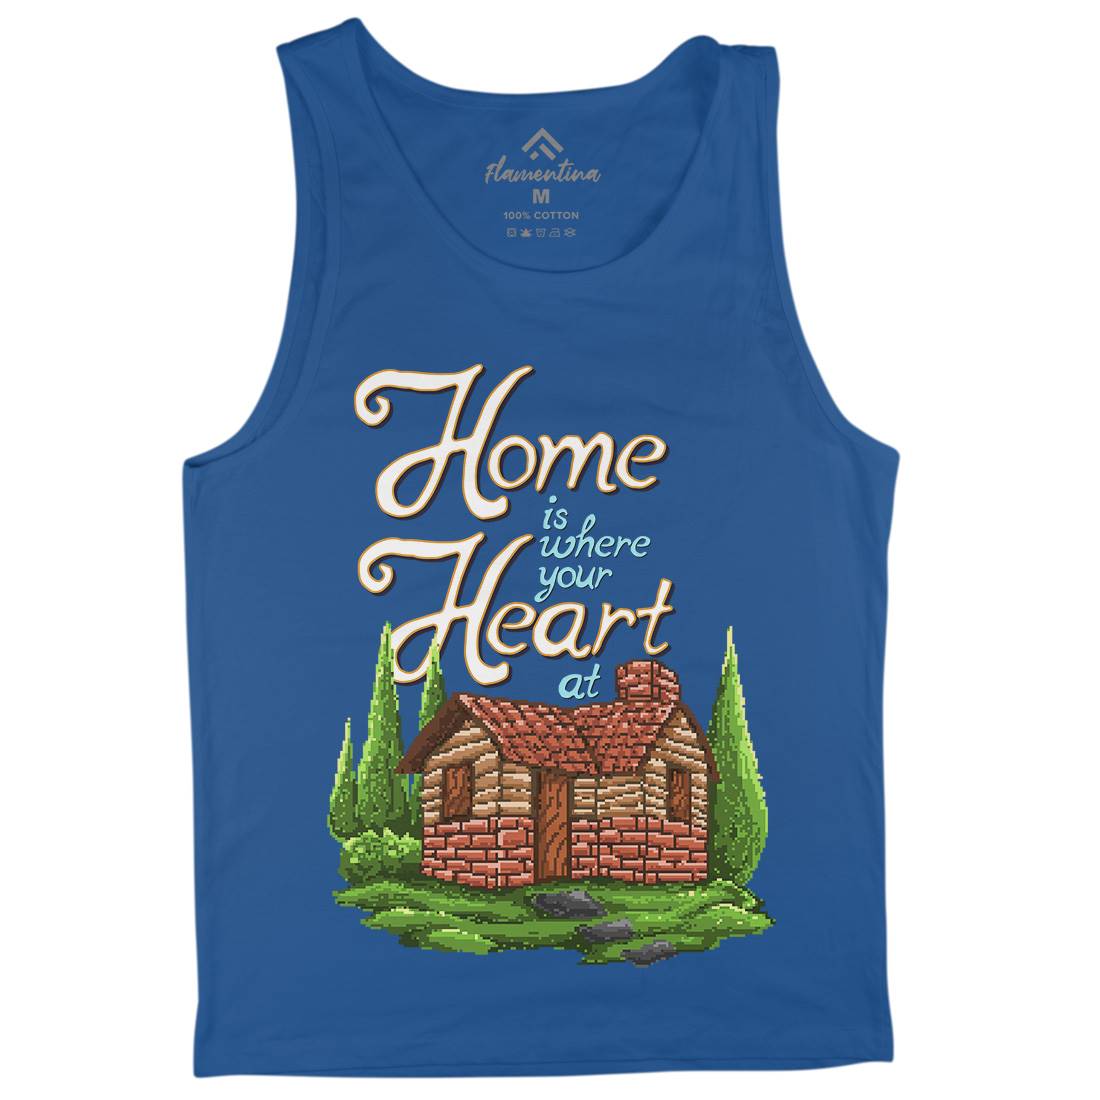 House Is Where Your Heart At Mens Tank Top Vest Nature B912